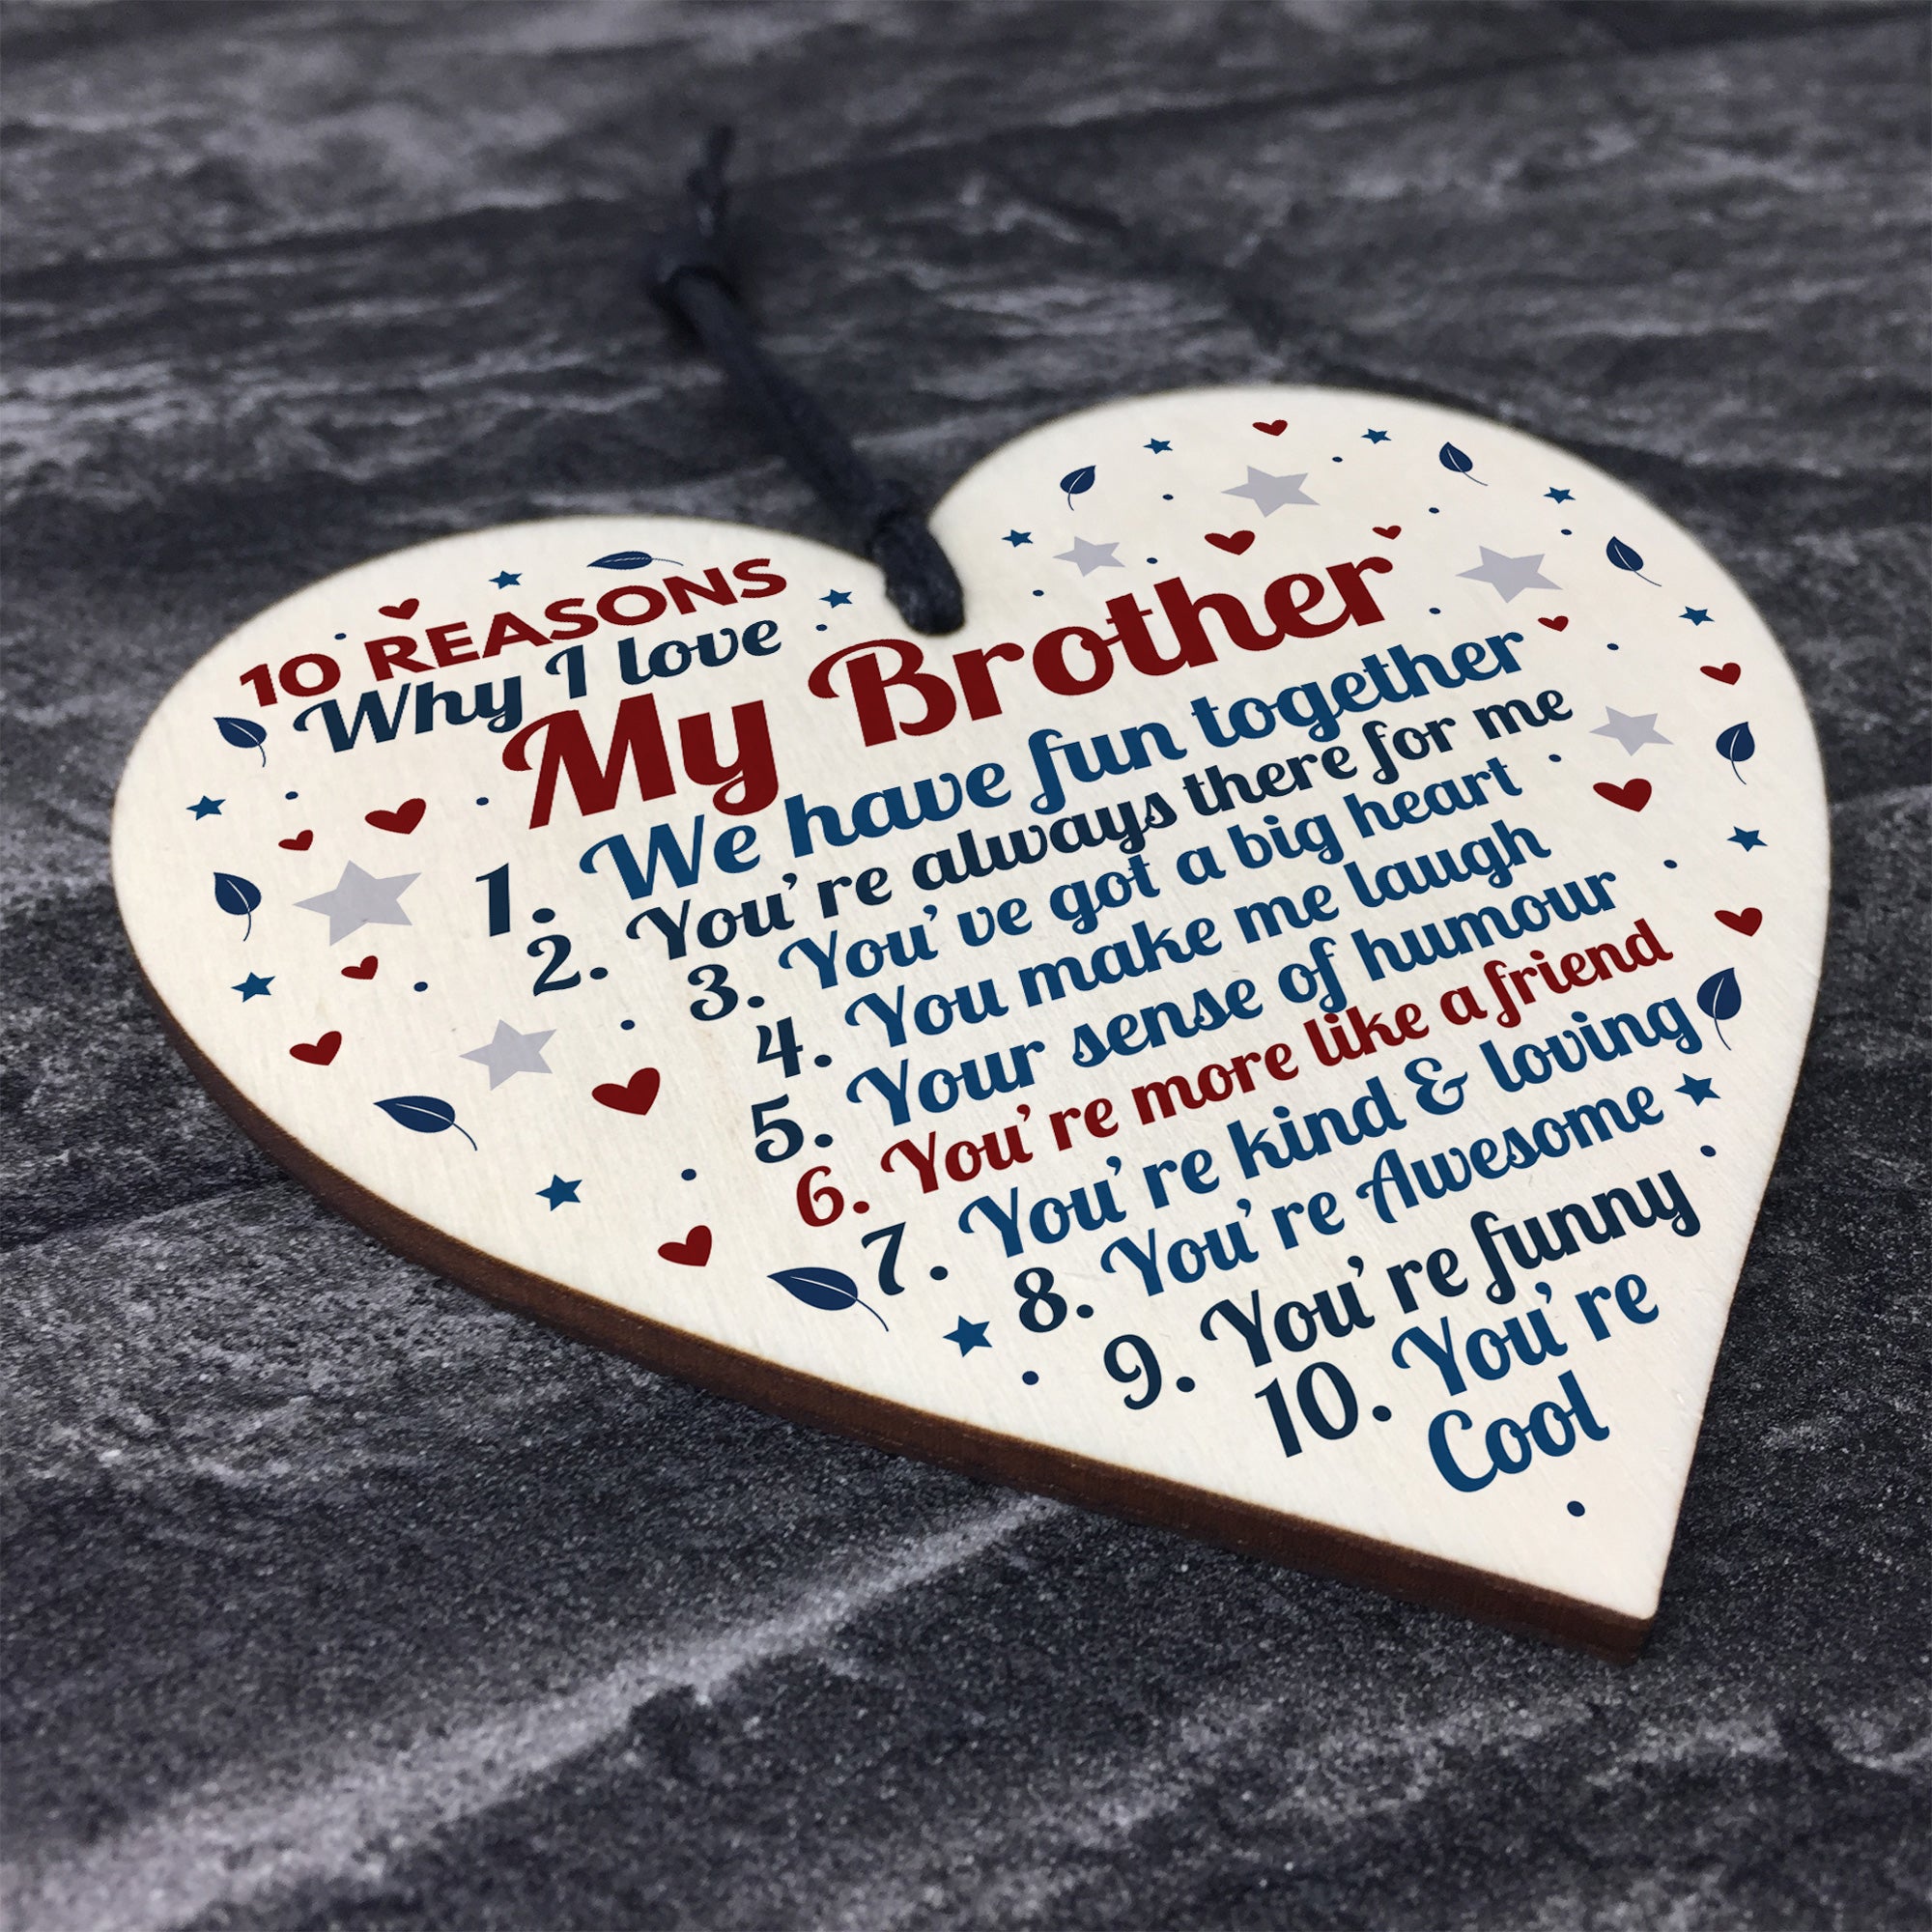 My Brother Knows Everything Personalized Satin Pillow: Gift/Send Bhaidooj  Gifts Online J11114571 |IGP.com